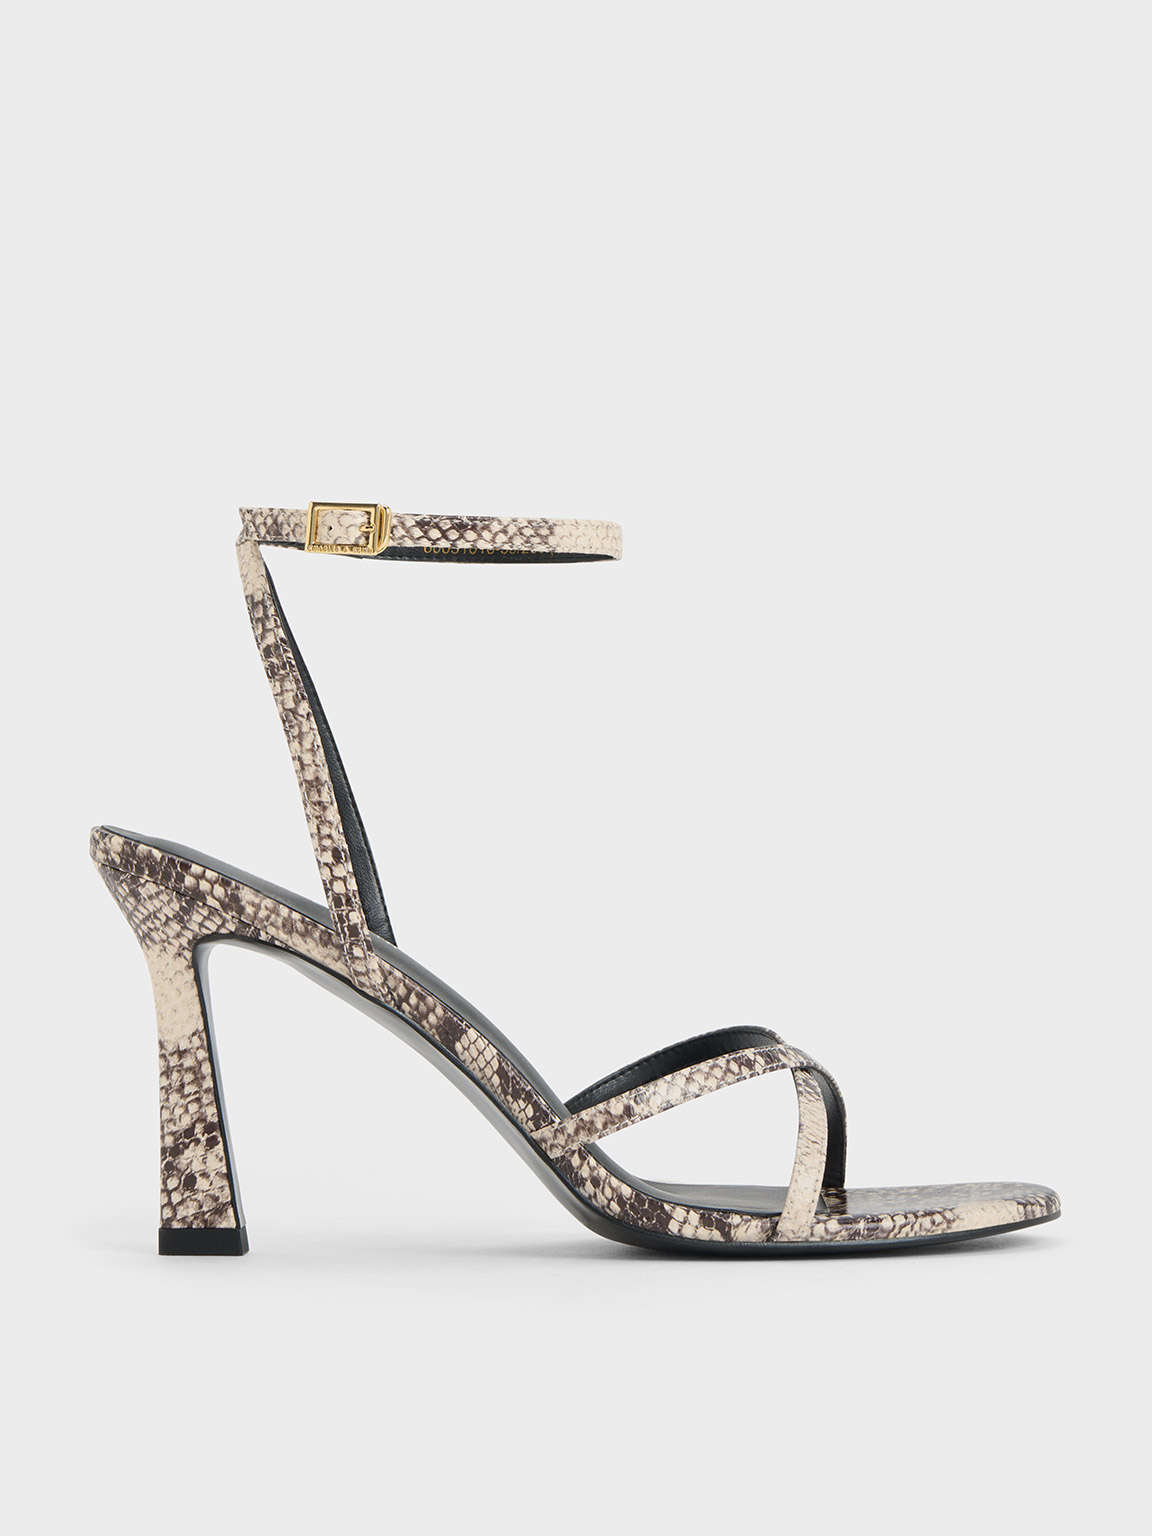 Snakeskin Print Chunky Heeled Ankle Strap Sandals | SHEIN